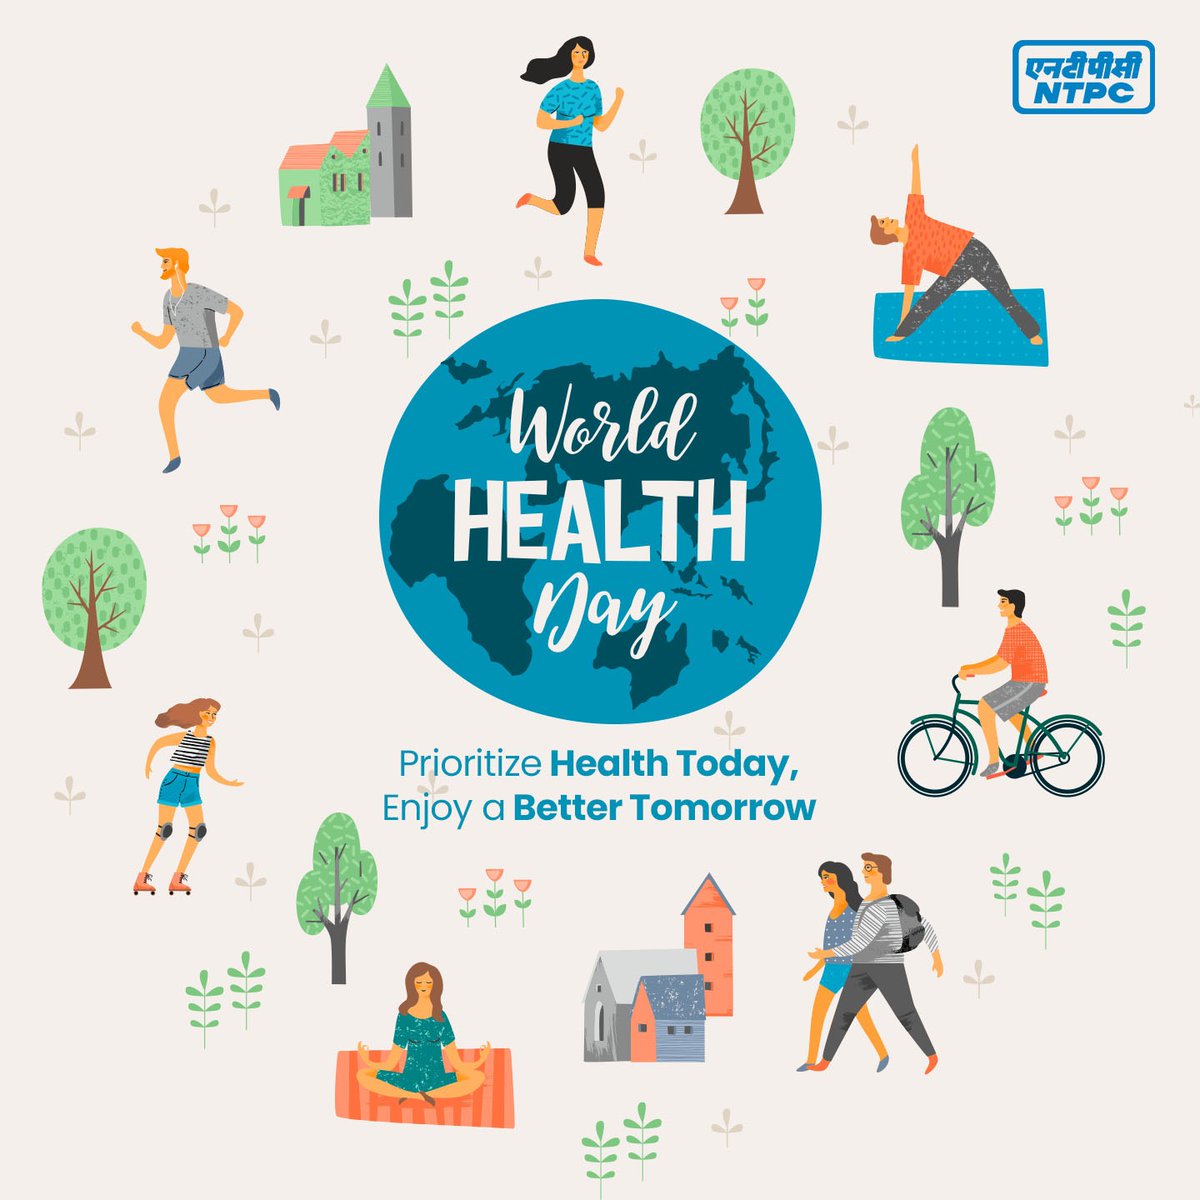 This World Health Day, NTPC reaffirms its commitment to prioritize well-being for a healthier future. Through a spectrum of health programs and community outreach, we are dedicated to foster a brighter tomorrow for all. #WorldHealthDay #MyHealthMyRight #HealthForAll…